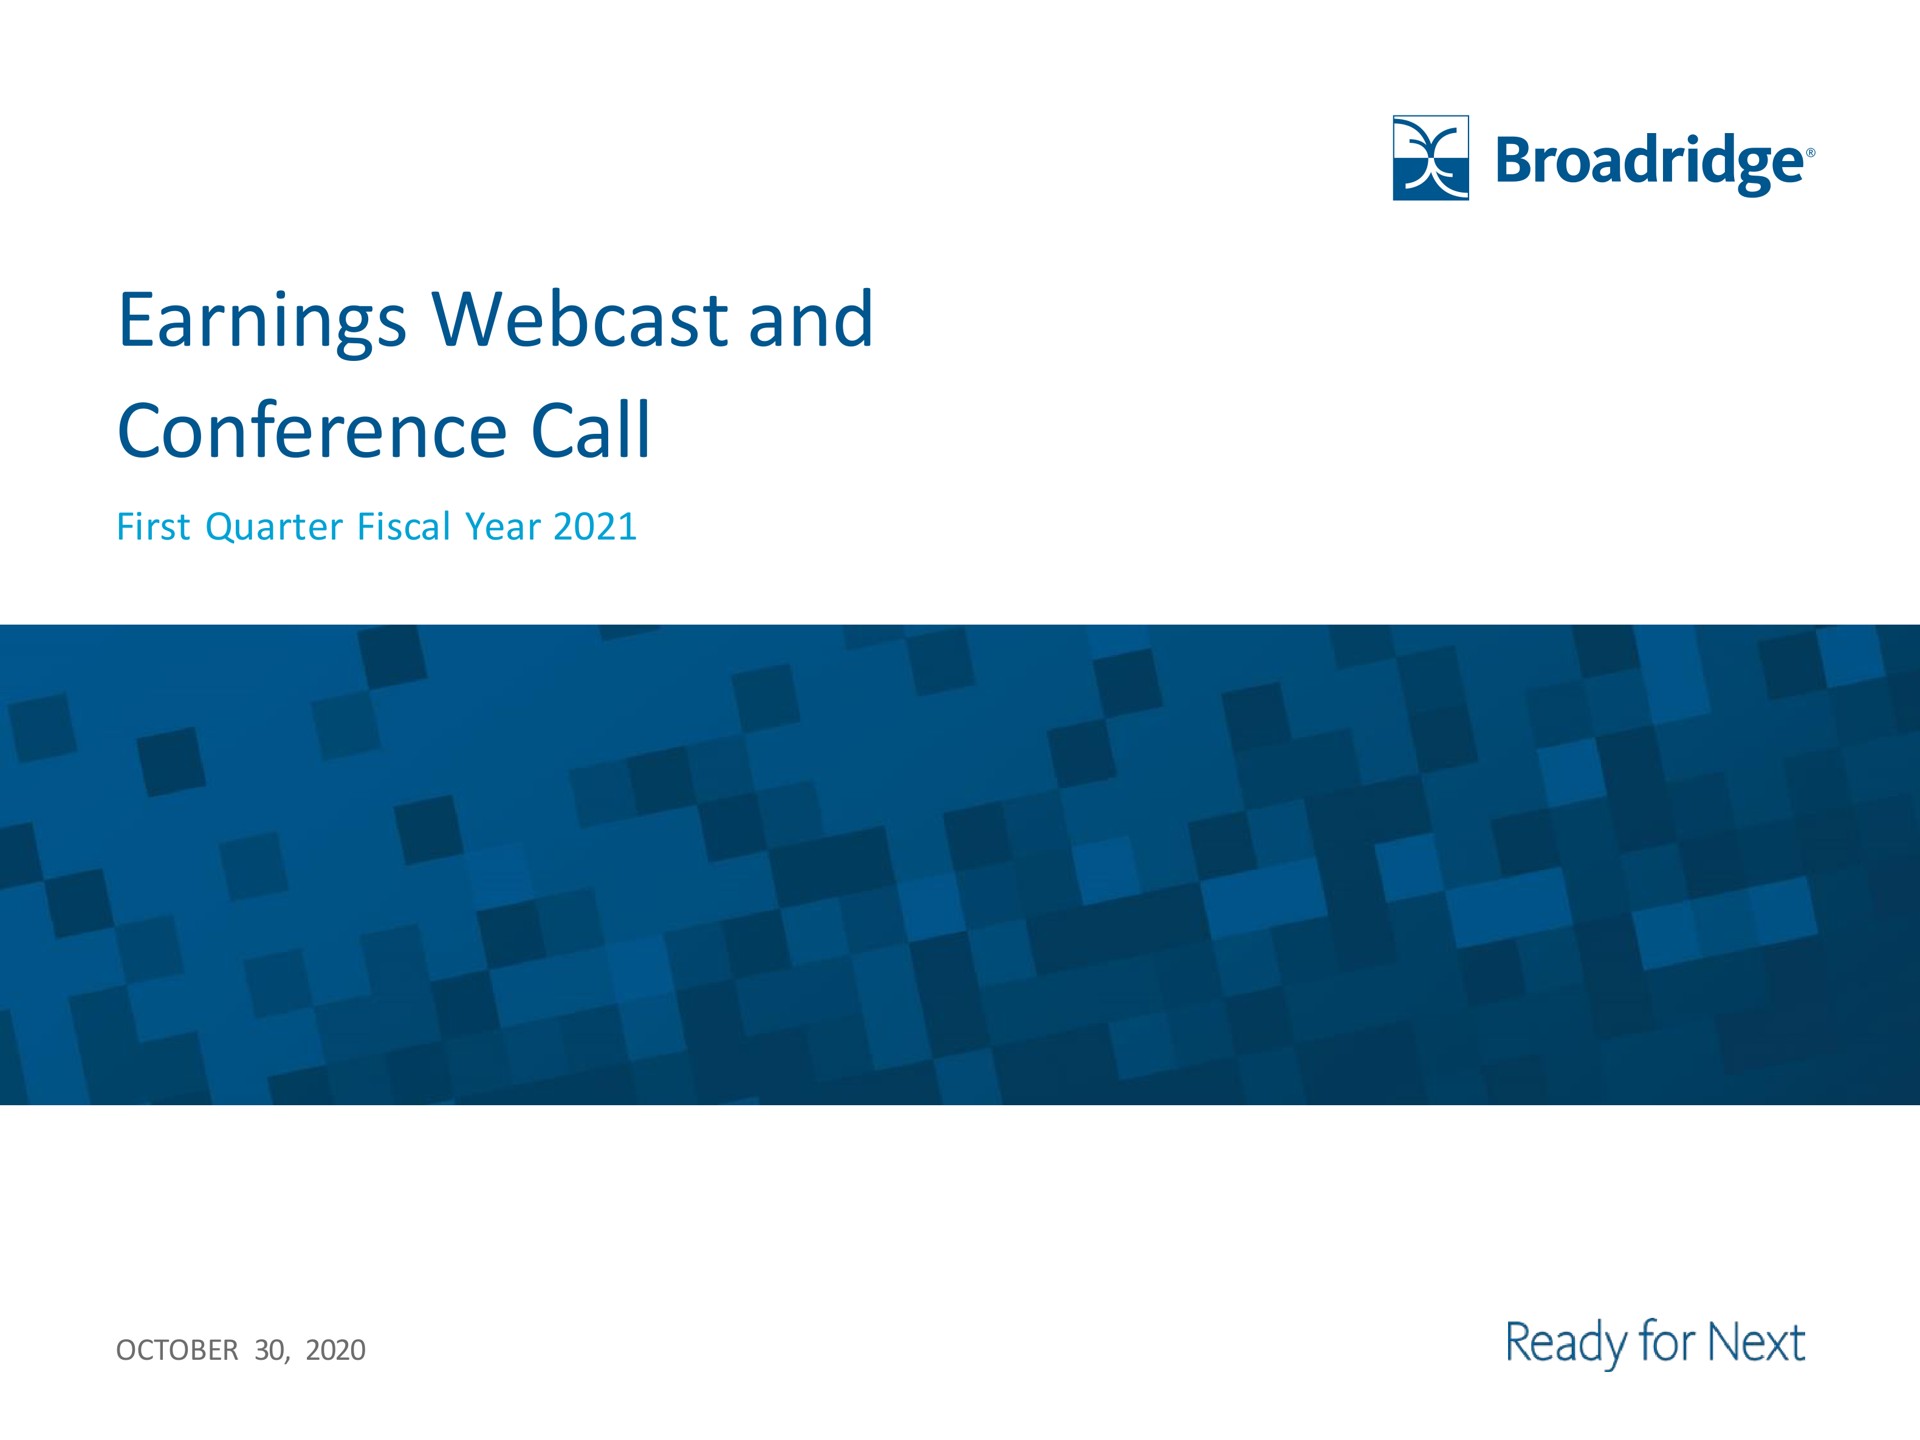 earnings and conference call | Broadridge Financial Solutions